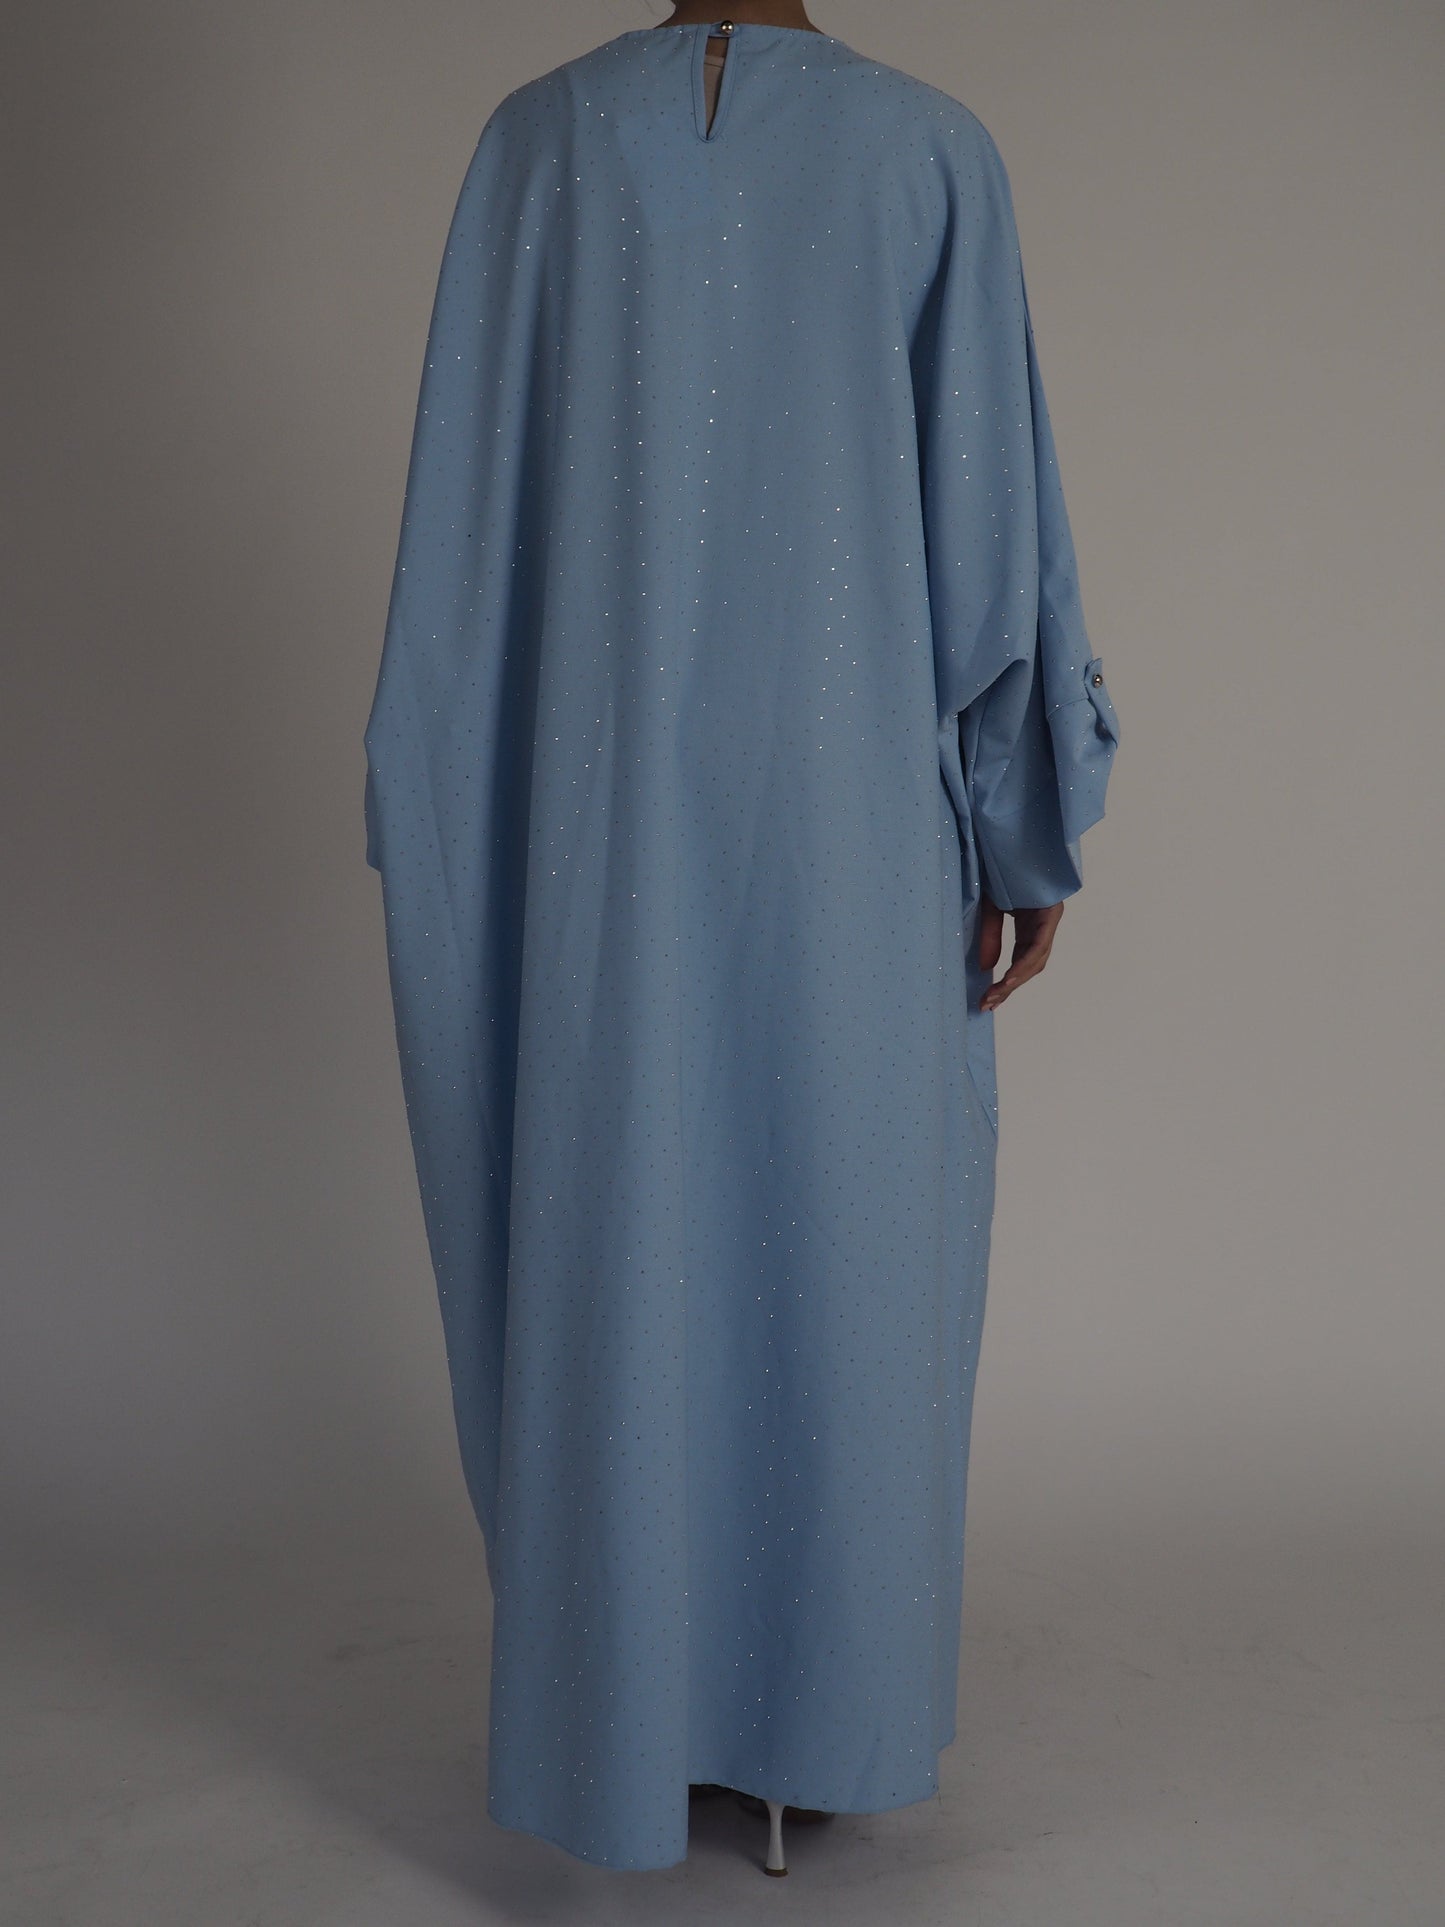 BERBISH Diamante abaya / dress high quality with  button sleeve detail one size 8-20 [BRB 132]